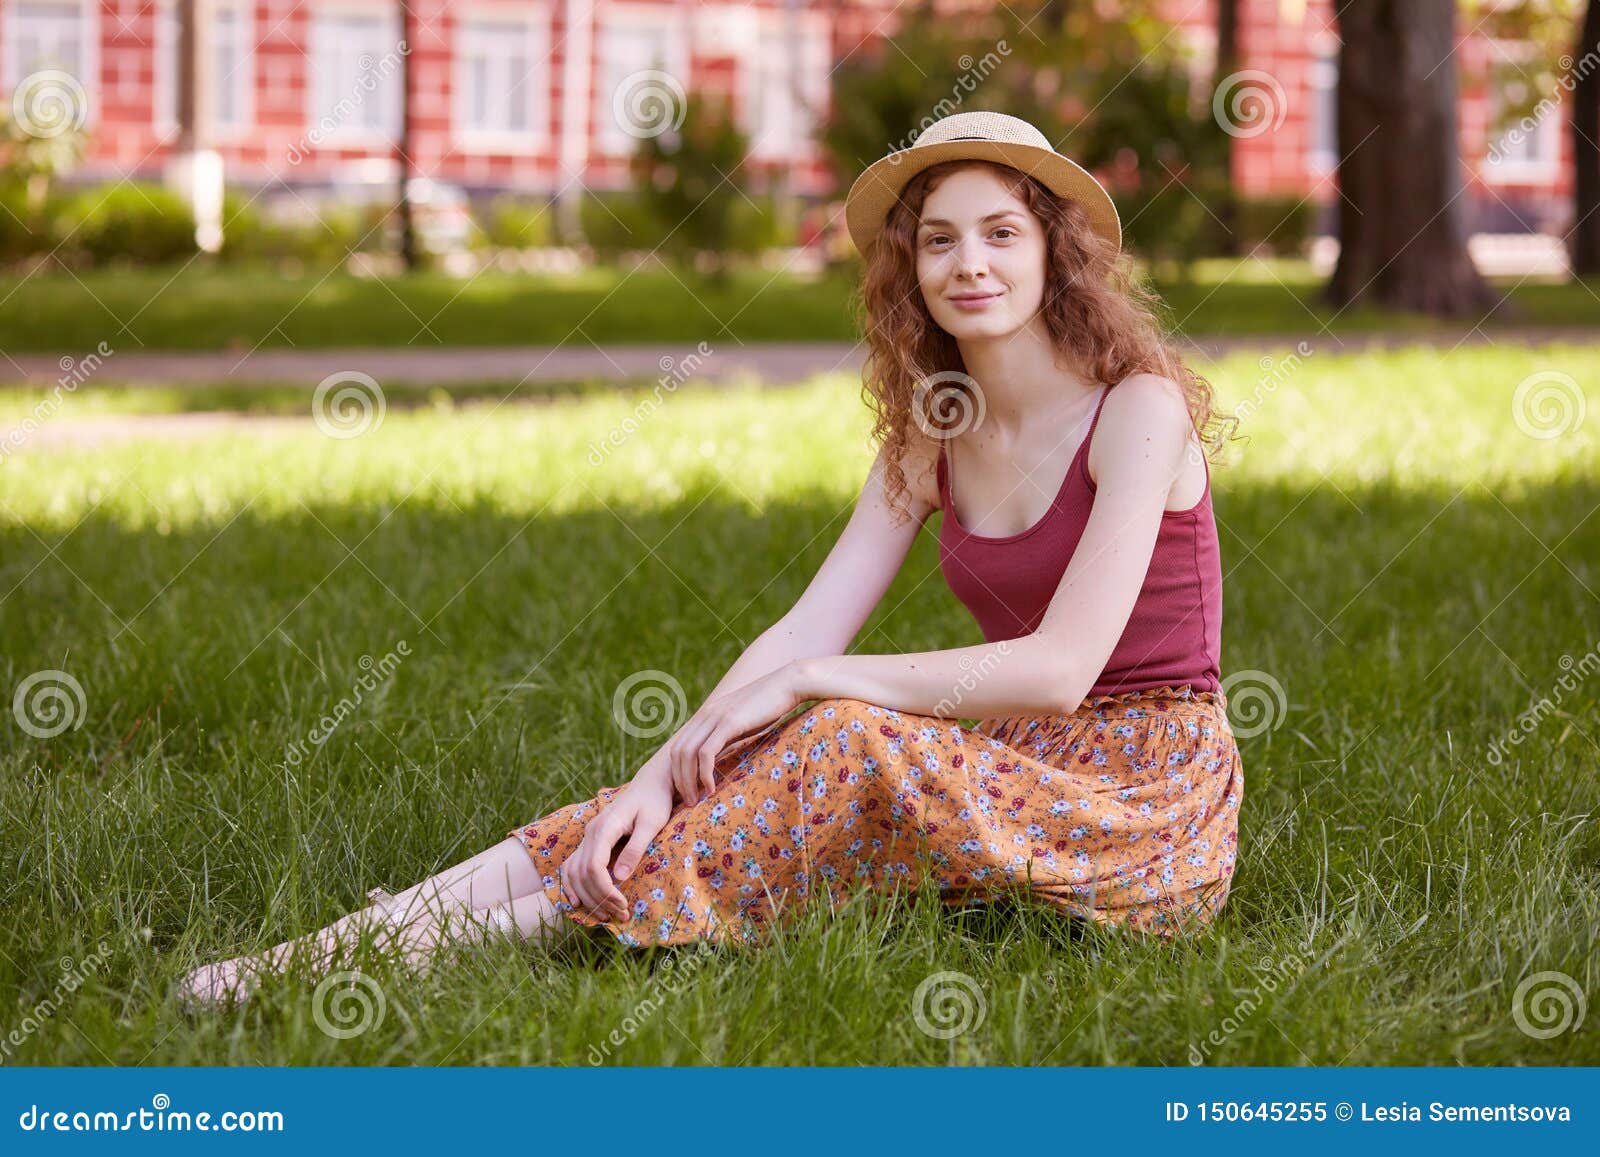 Adorable sport babe resting on the grass with sexy upskirt view